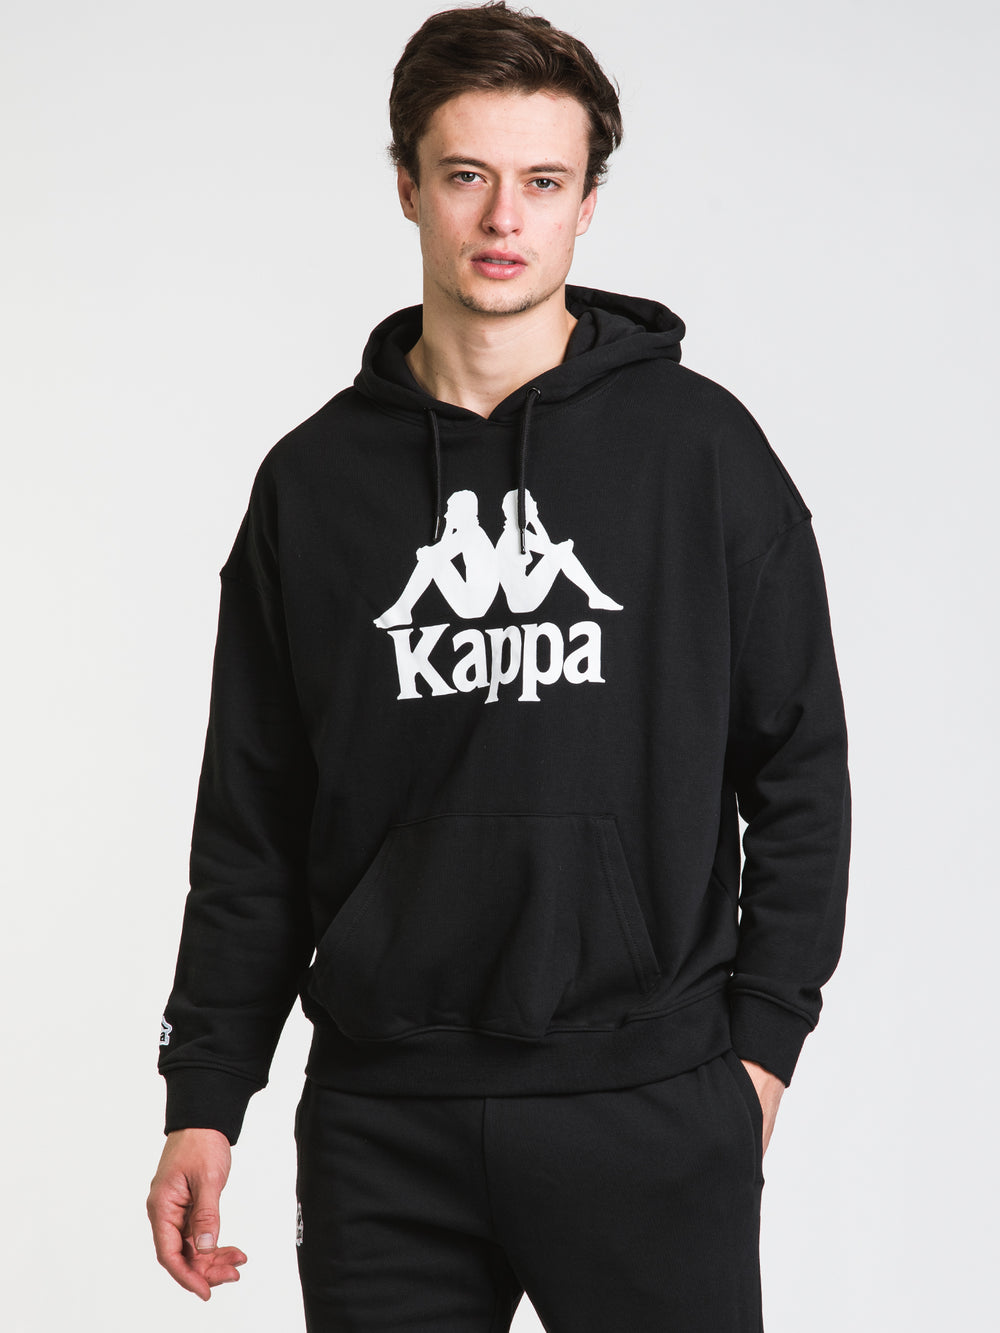 charme Grader celsius Kompliment KAPPA AUTHENTIC TENAXY PULLOVER HOODIE - CLEARANCE